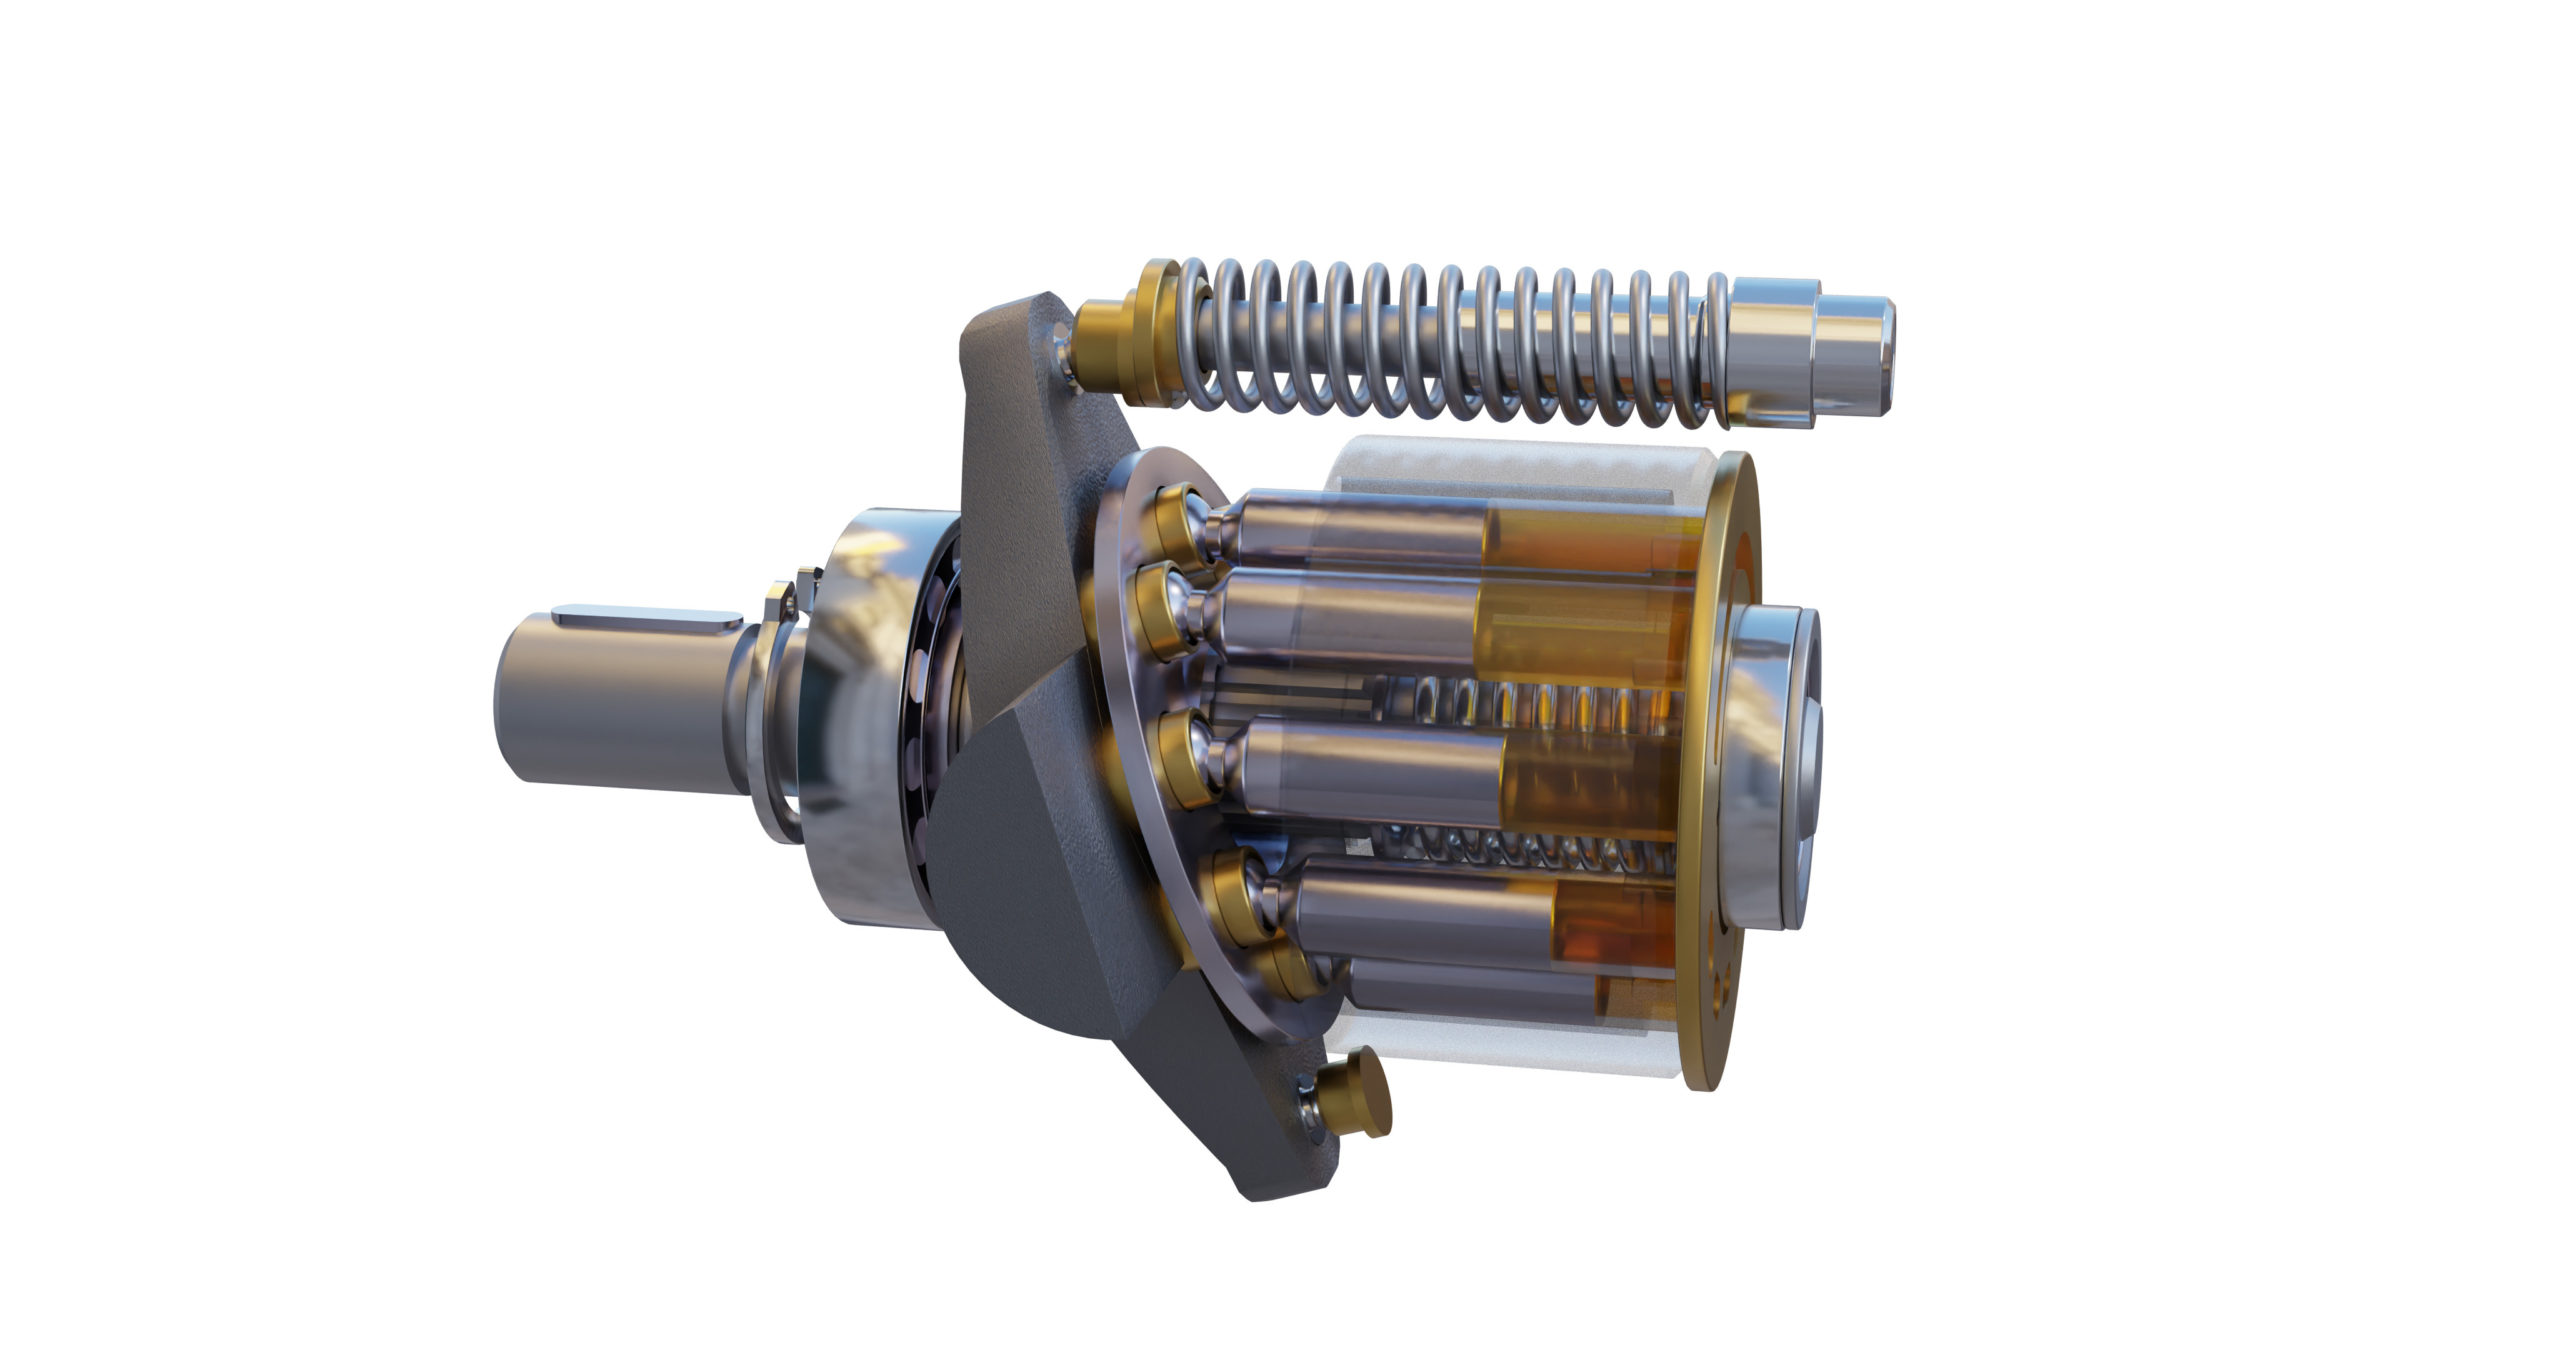 An animated image of an axial piston pump with a swashplate design